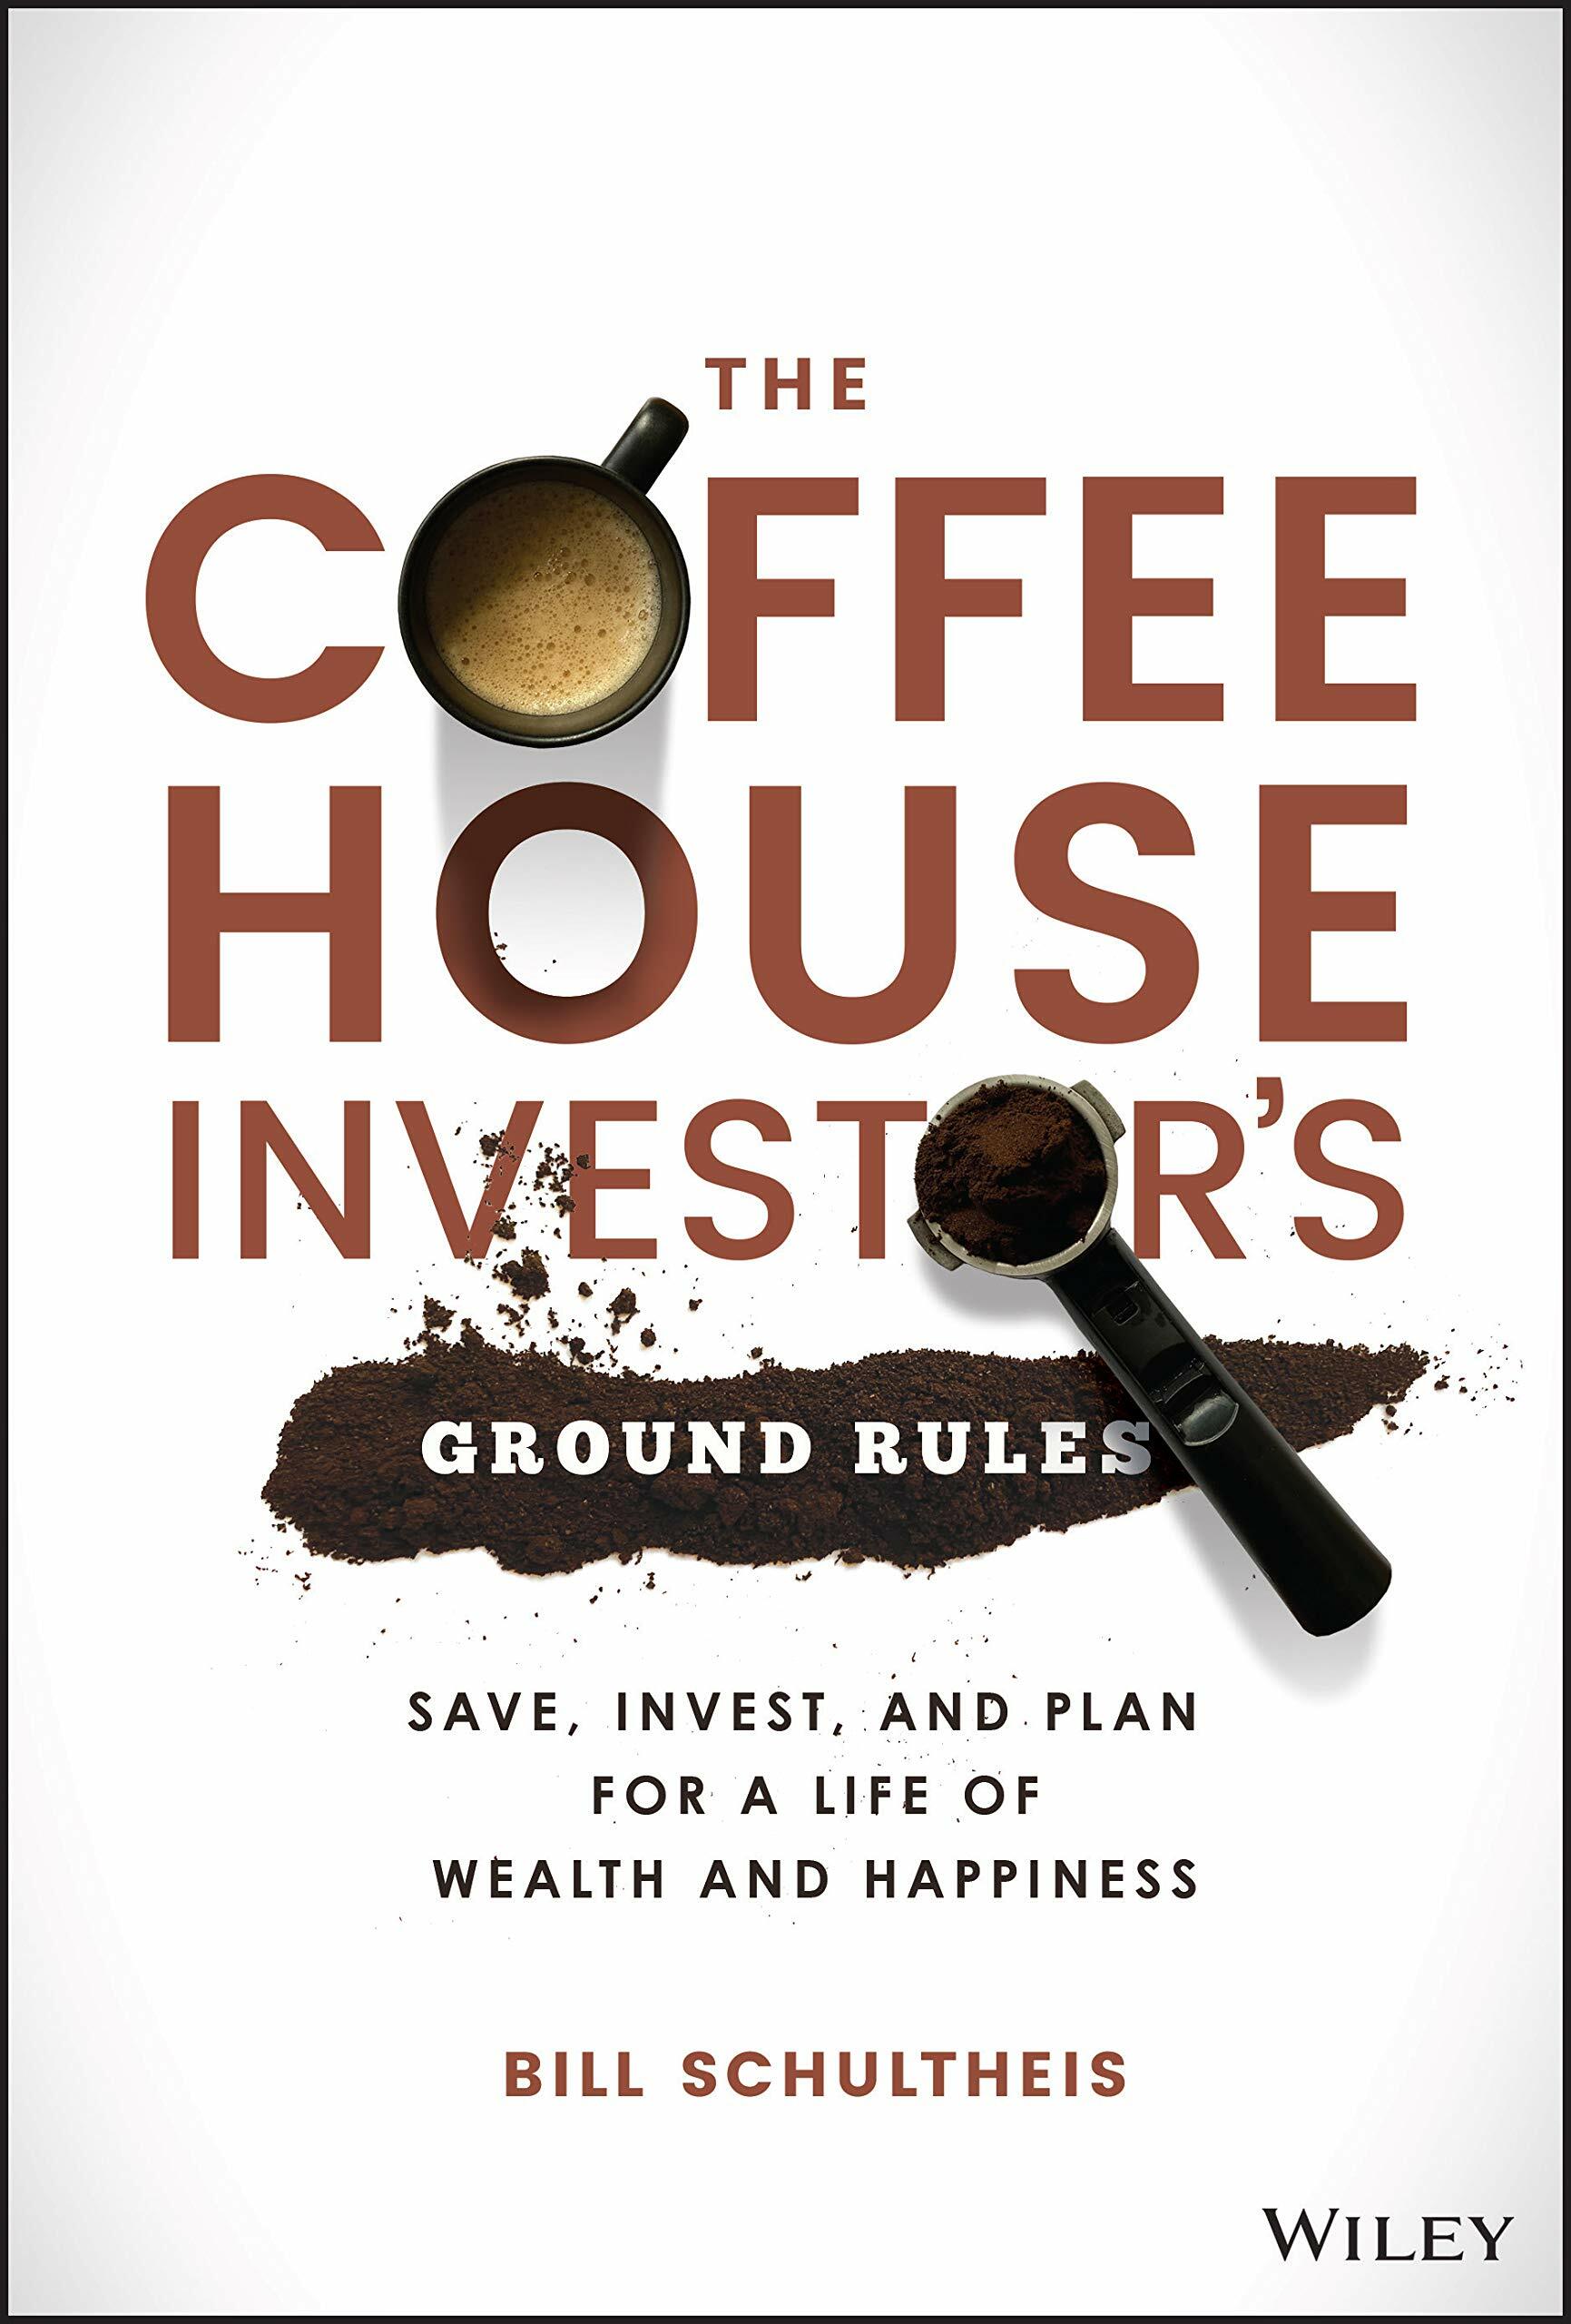 The Coffeehouse Investors Ground Rules: Save, Invest, and Plan for a Life of Wealth and Happiness (Hardcover)